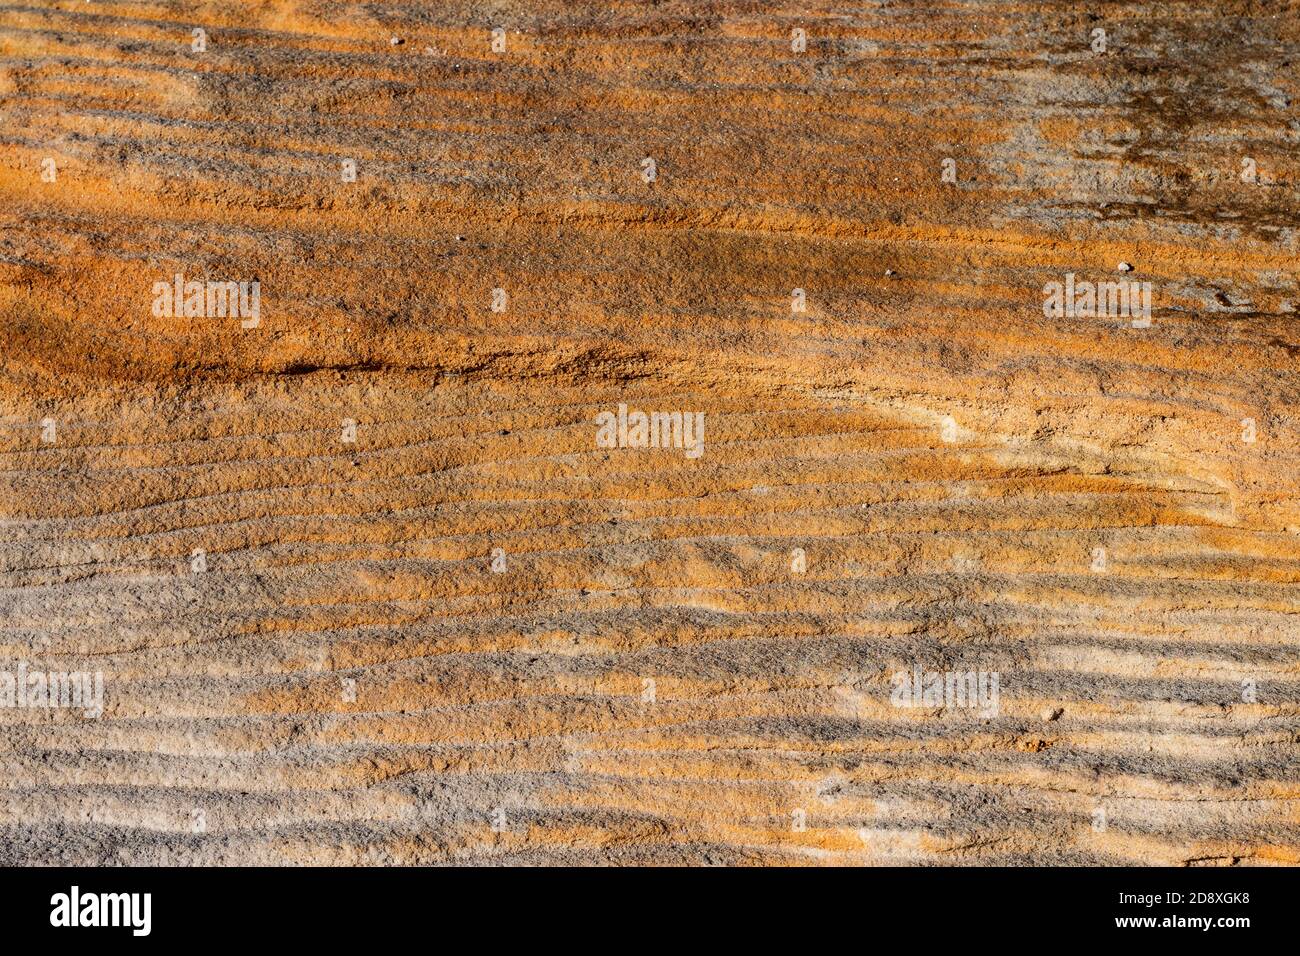 Natural sandstone rock rippled textured surface ideal as background Stock Photo